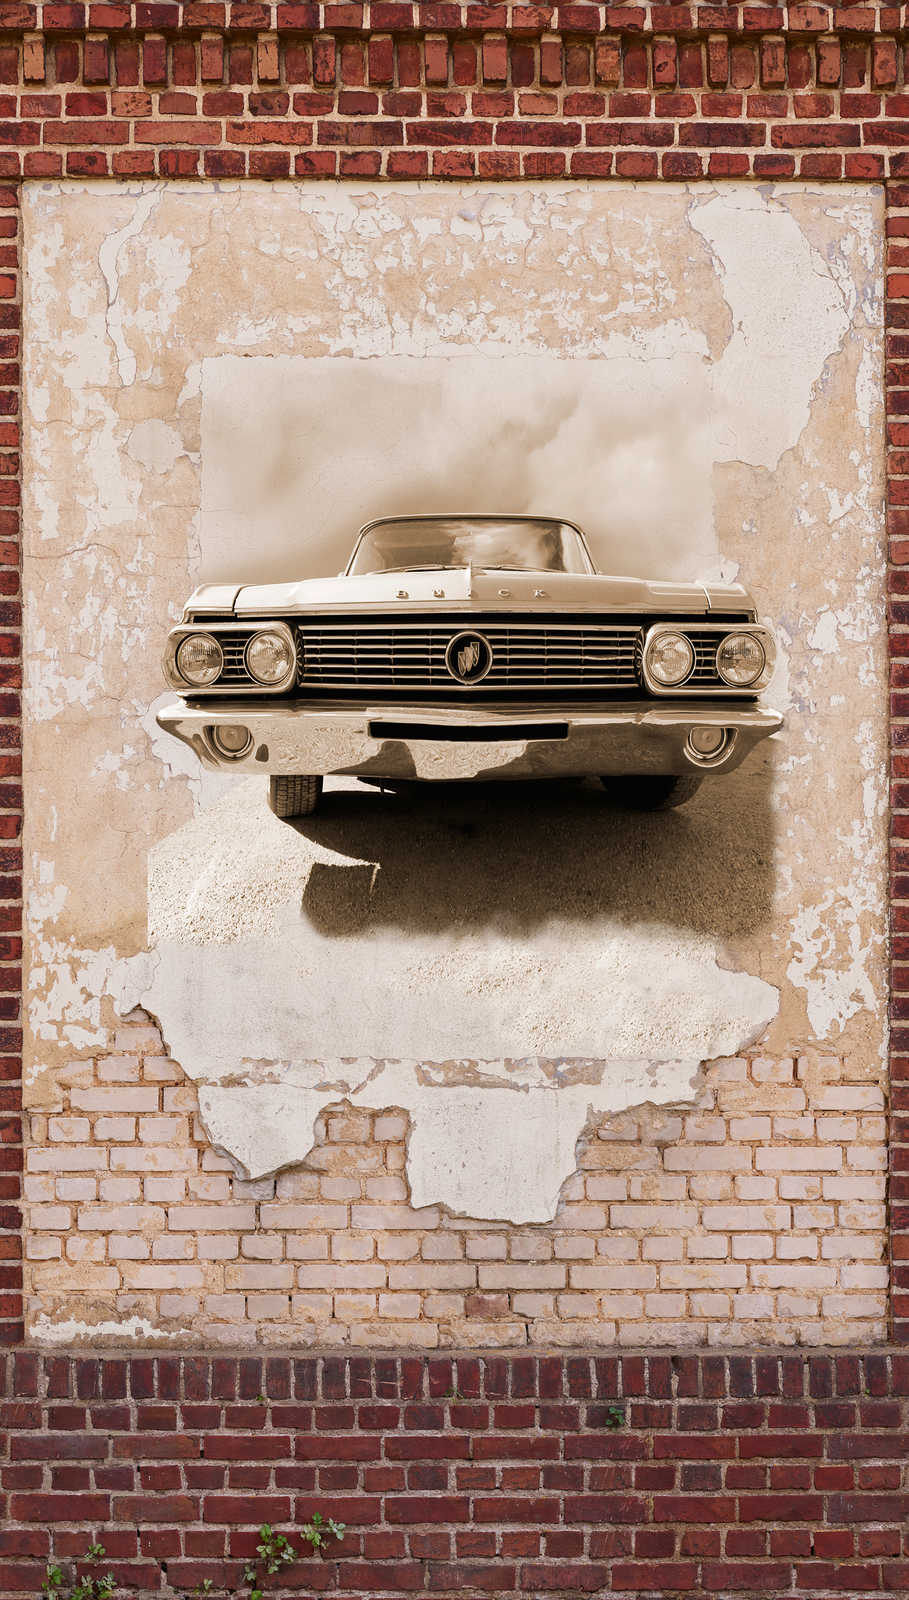             Stone-look wallpaper with car motif in vintage style - brown, beige, red
        